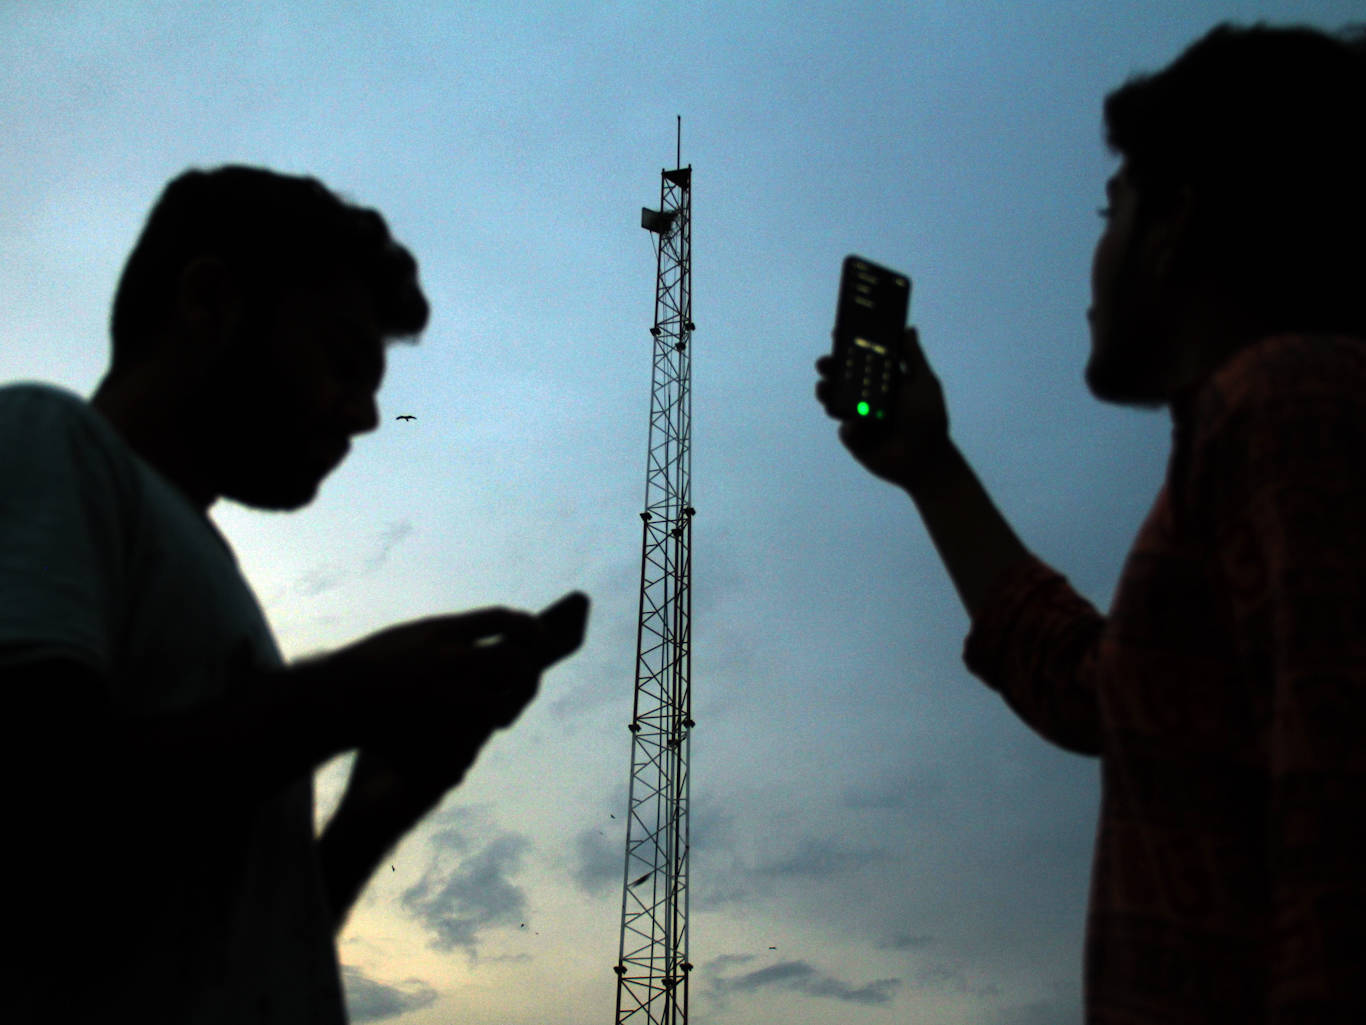 India's dirt-cheap data plans are no good when smartphones still cost a fortune for the poor - Business Insider India